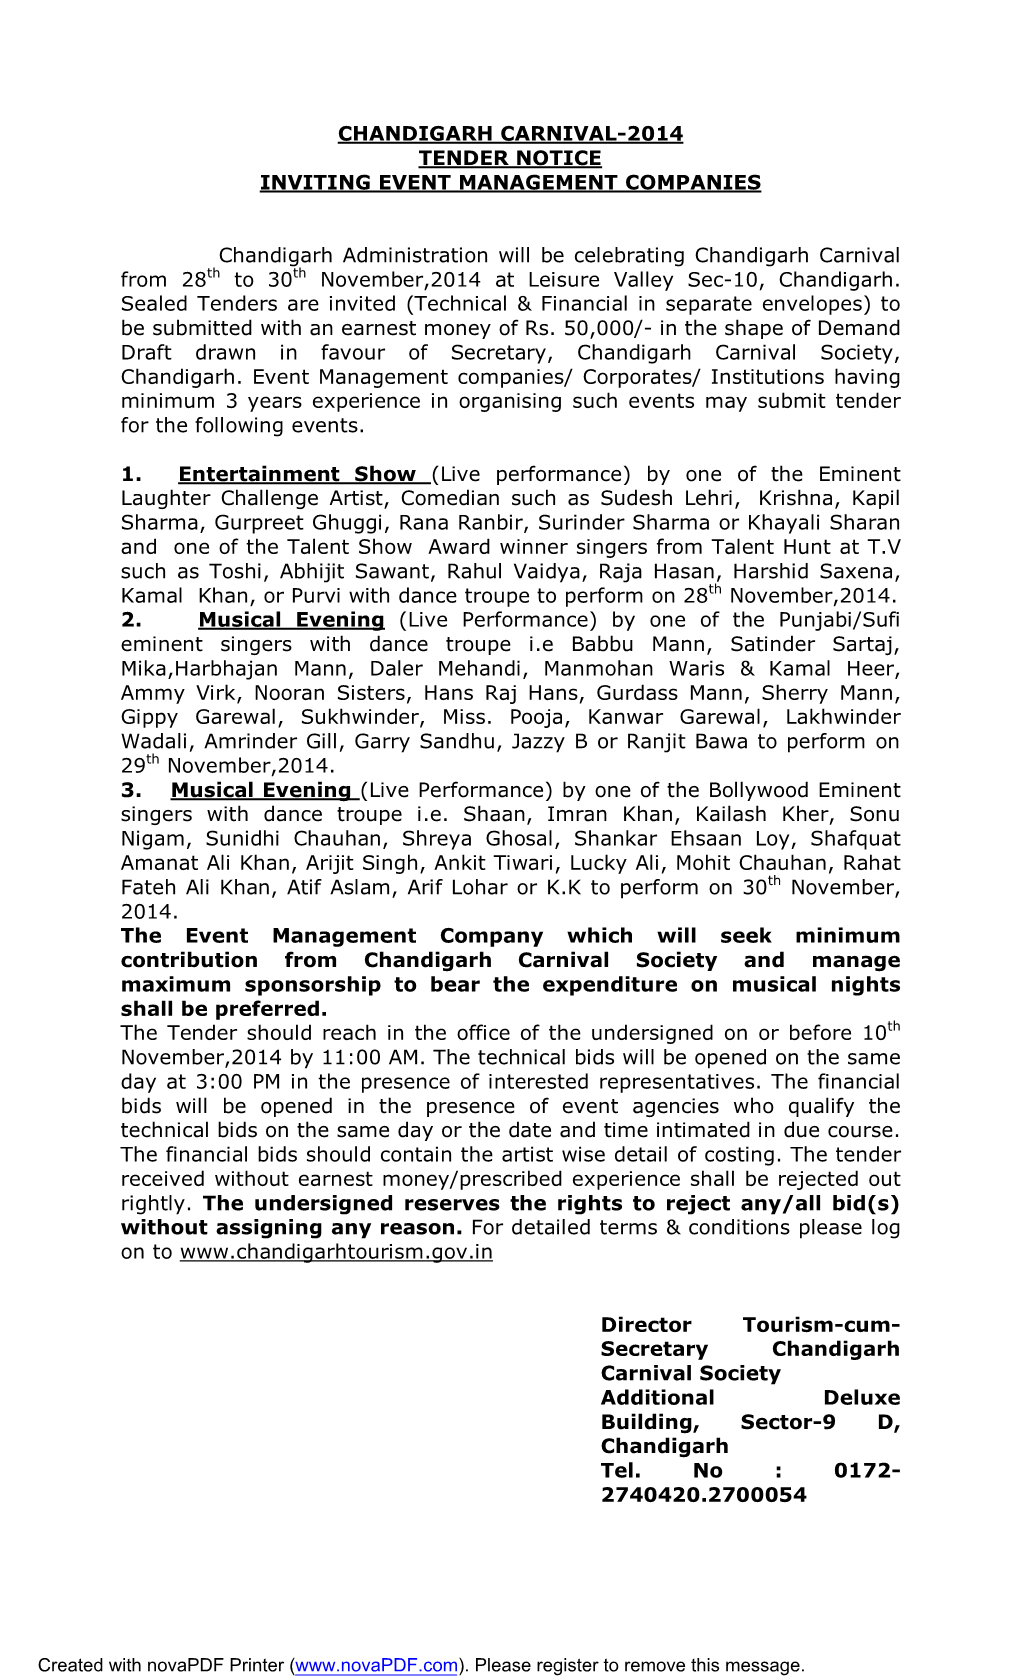 Chandigarh Carnival-2014 Tender Notice Inviting Event Management Companies